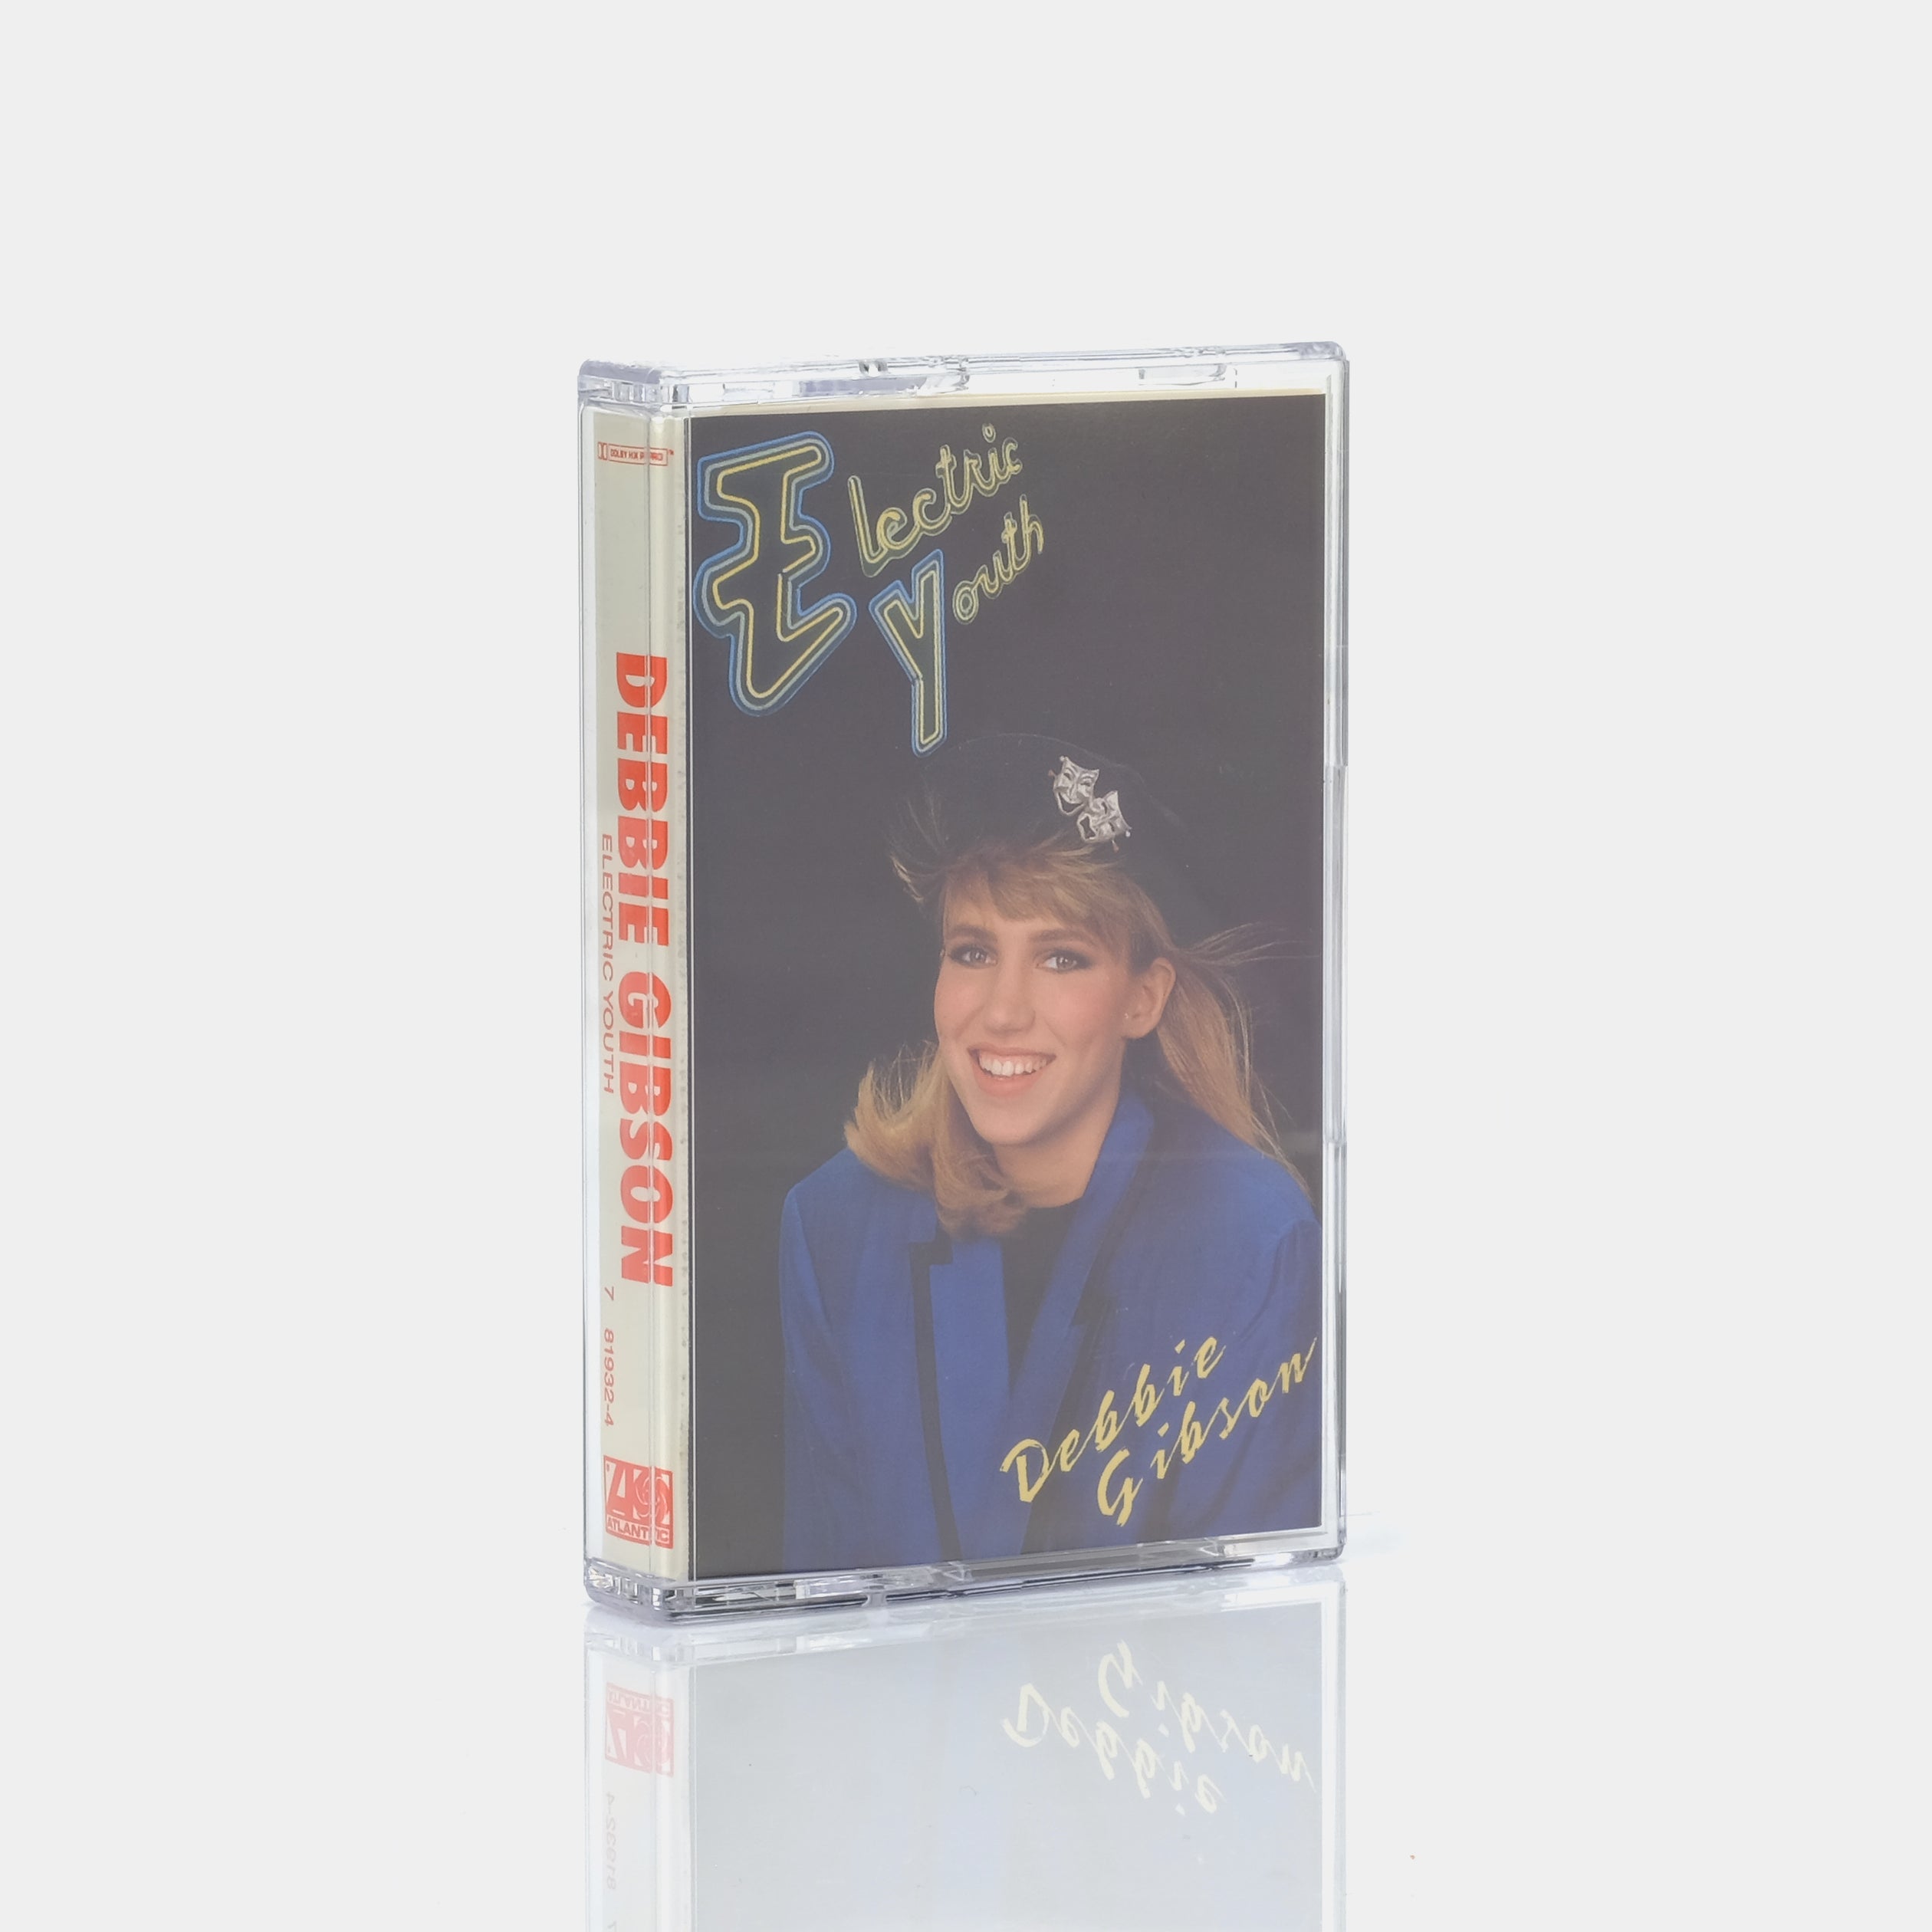 Debbie Gibson - Electric Youth Cassette Tape